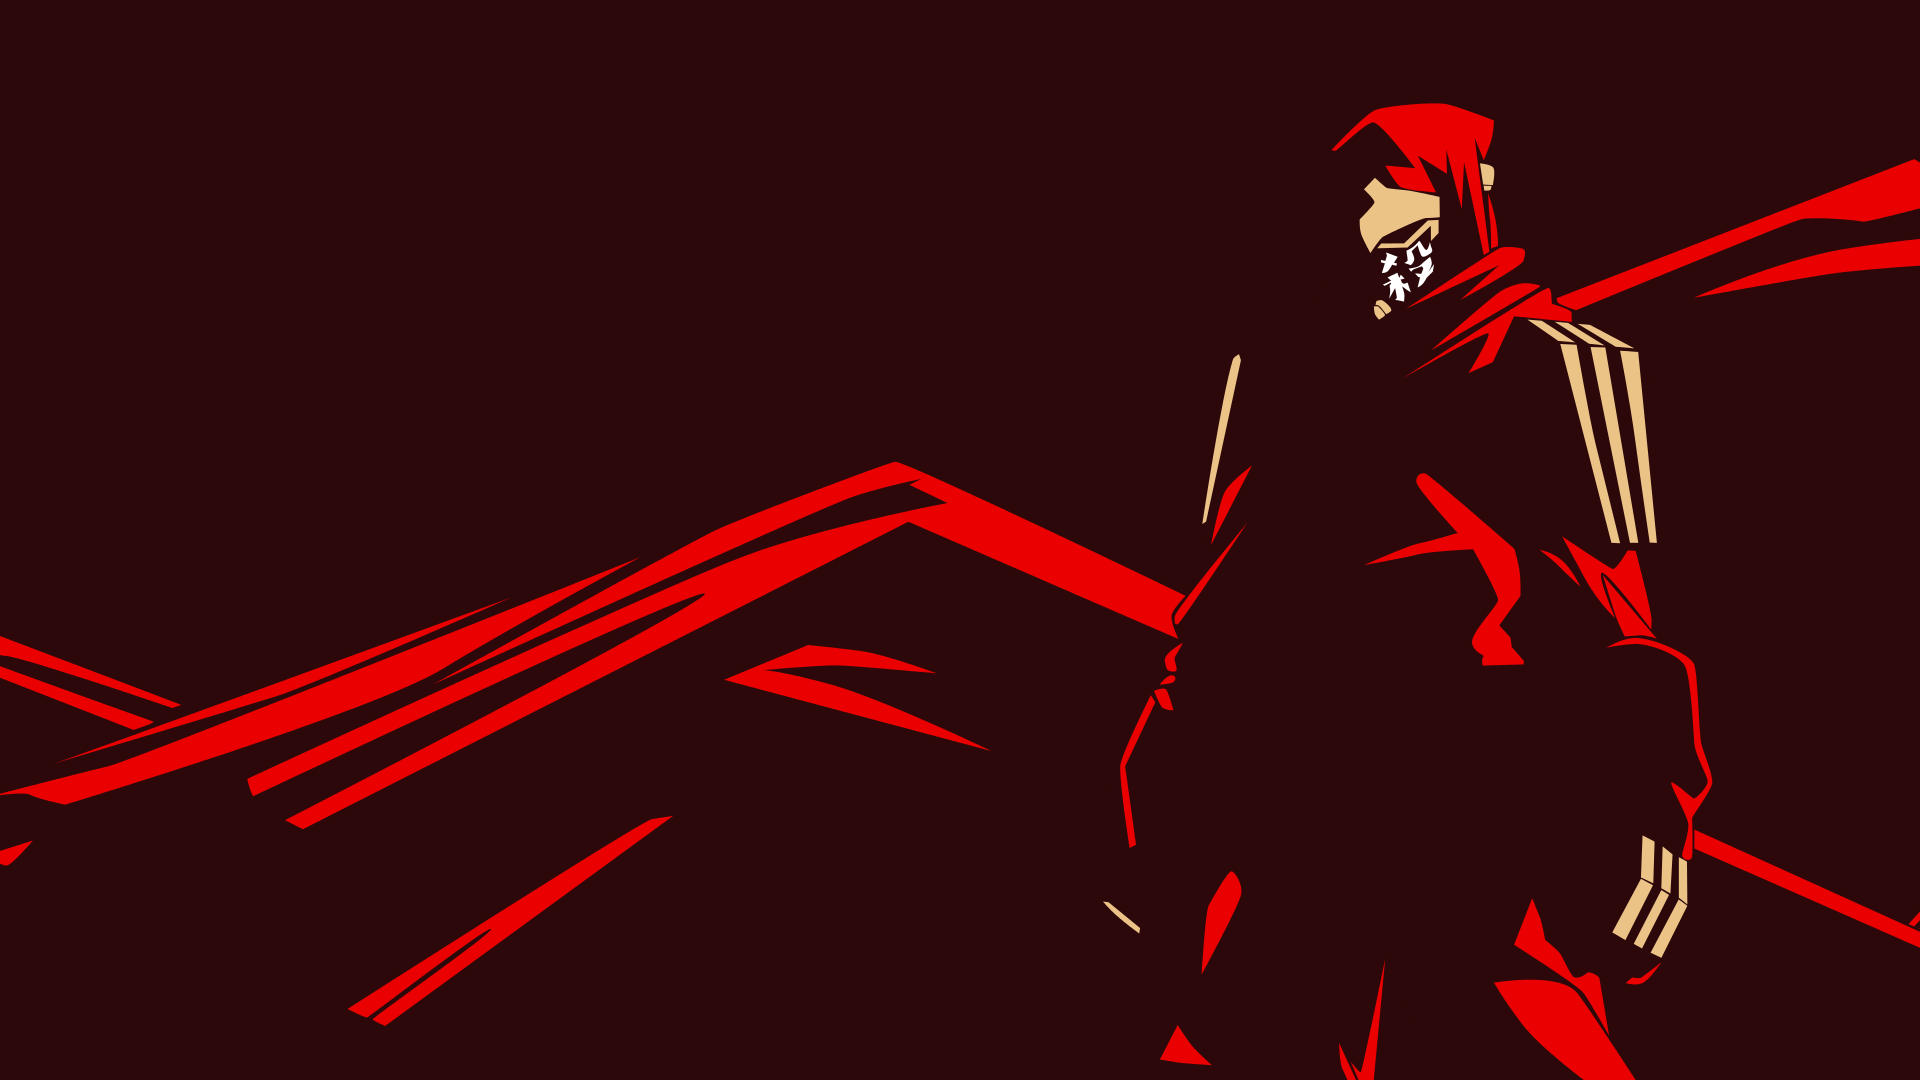 Anime Vector Wallpapers - Wallpaper Cave